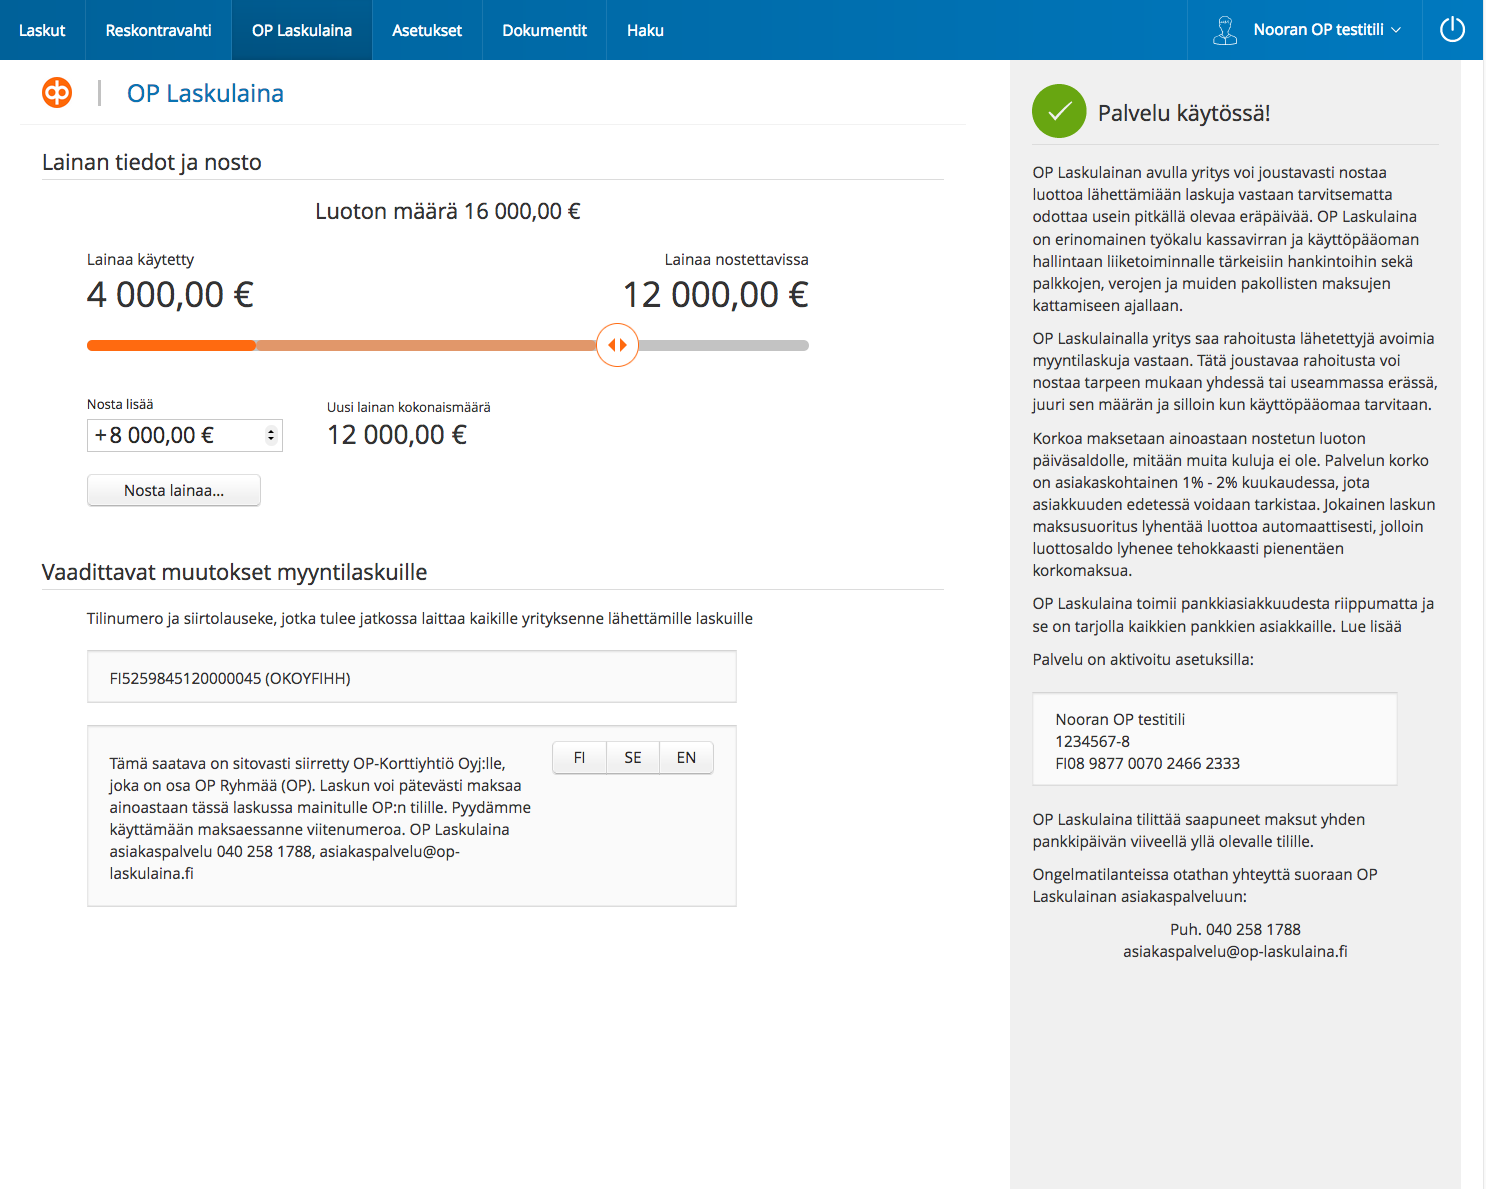 4000 € withdrawn and about to withdraw 8000 € more